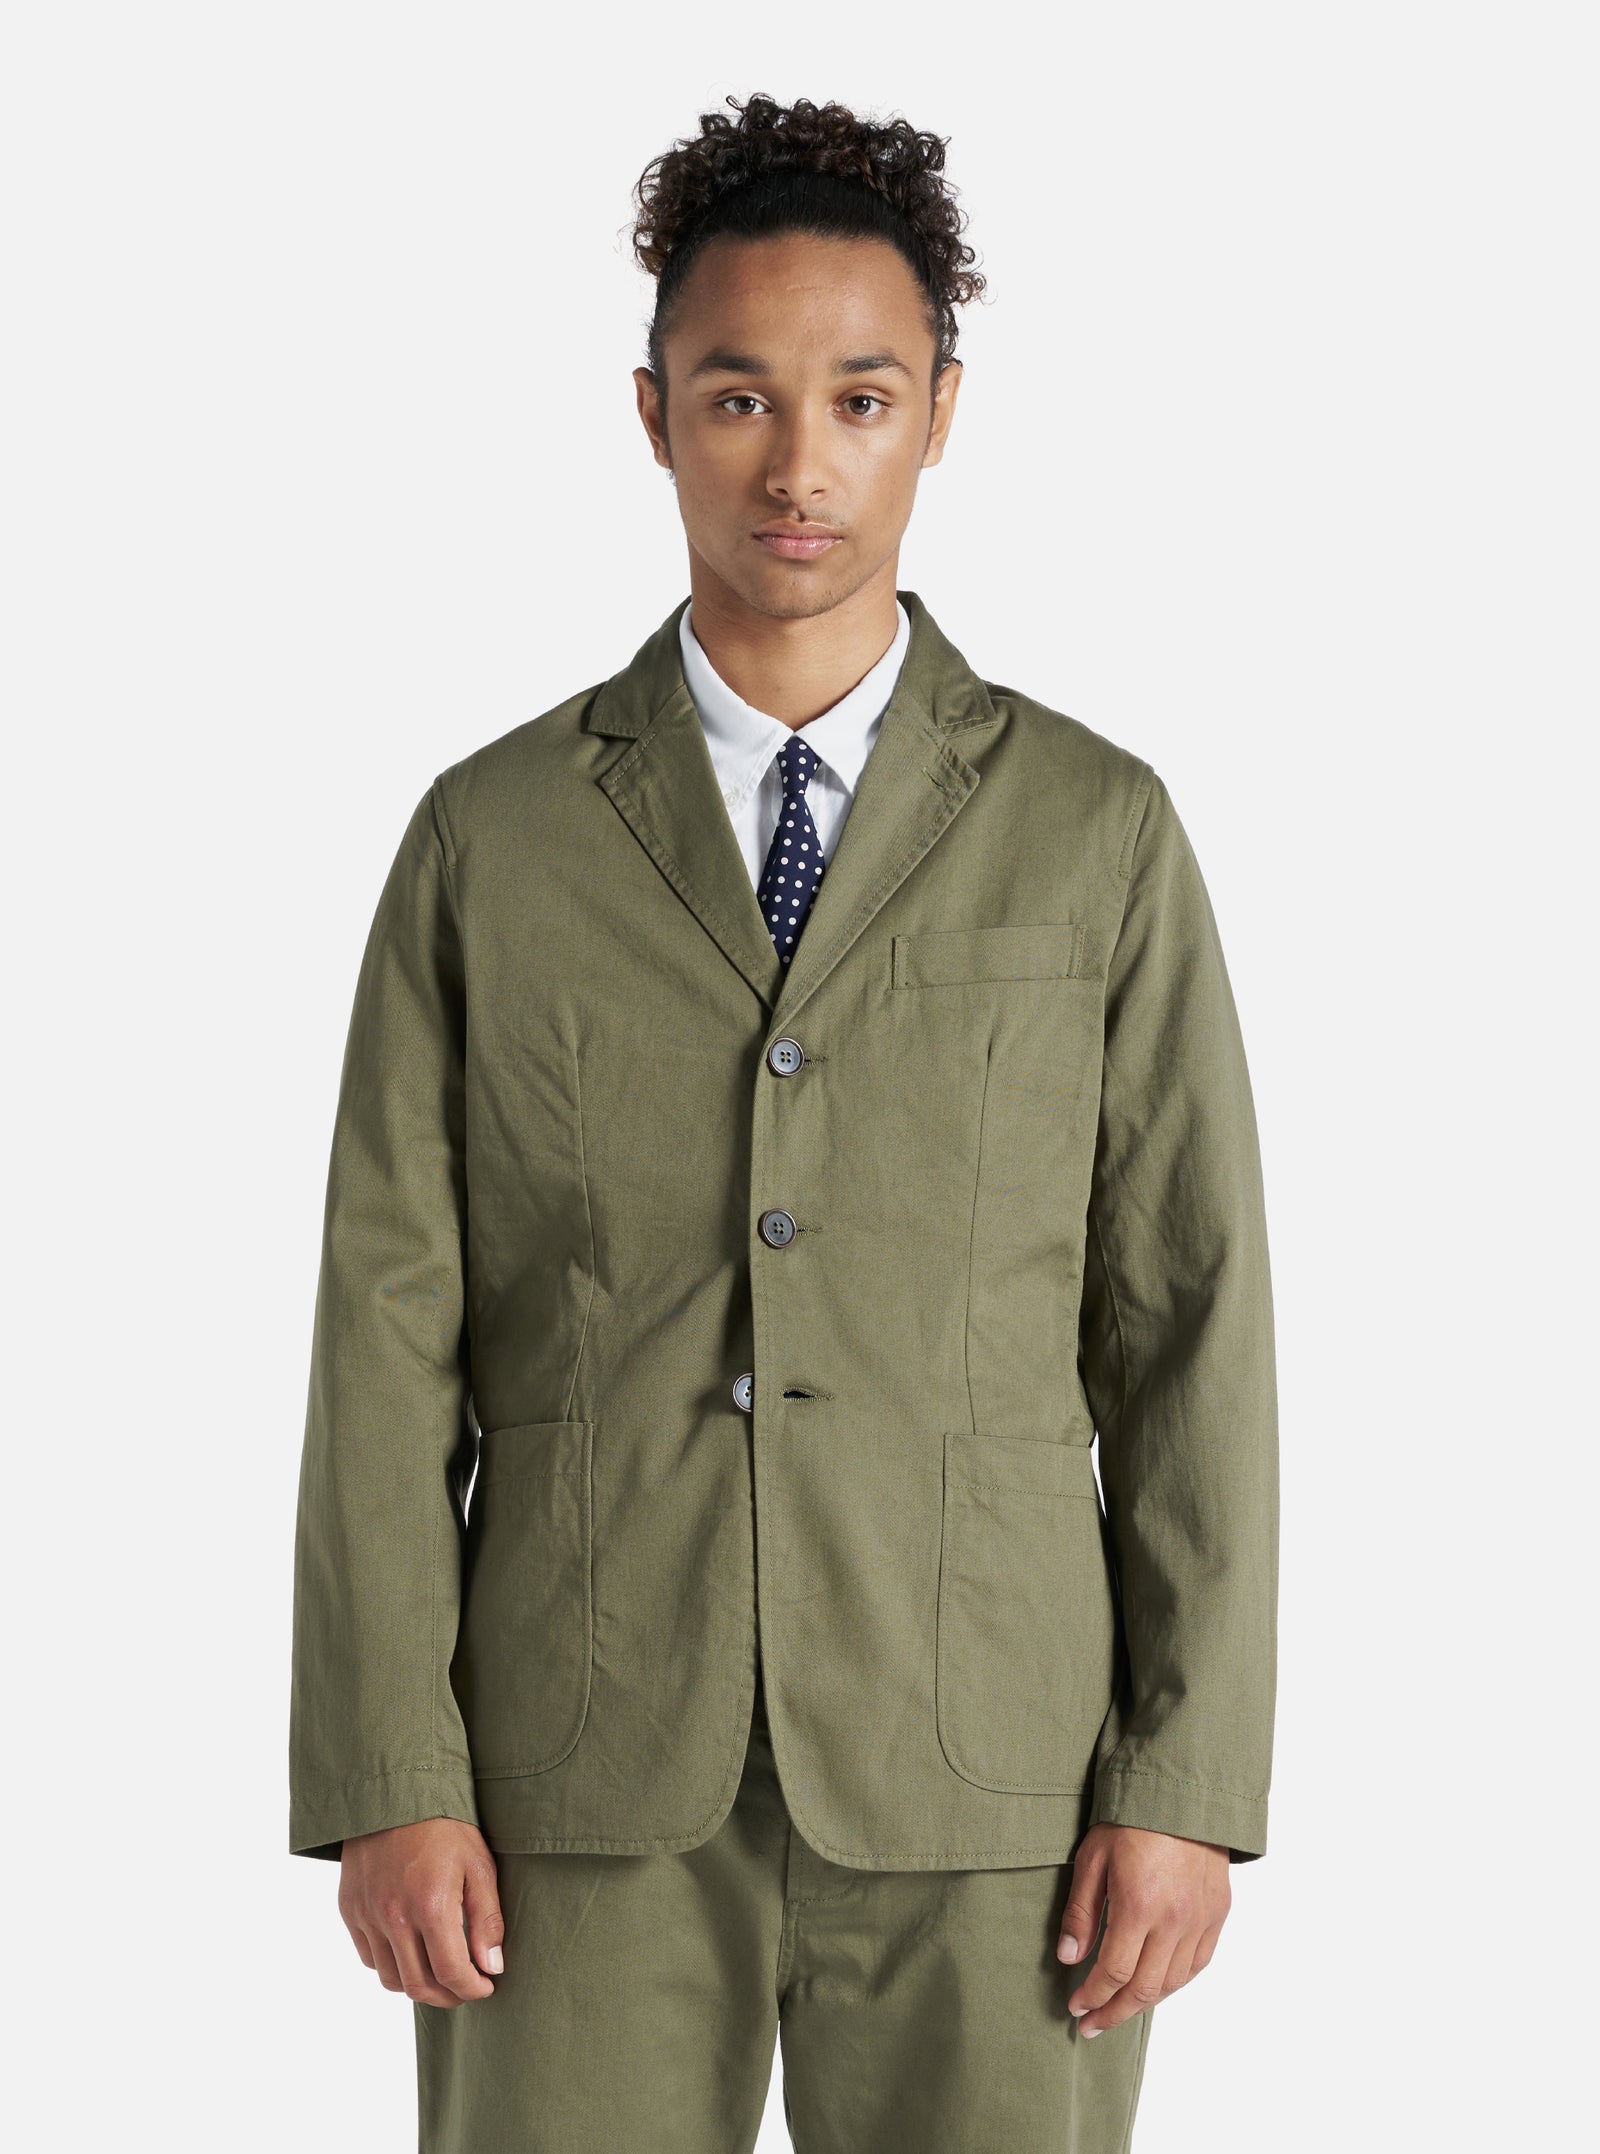 Universal Works London Jacket in Light Olive Twill